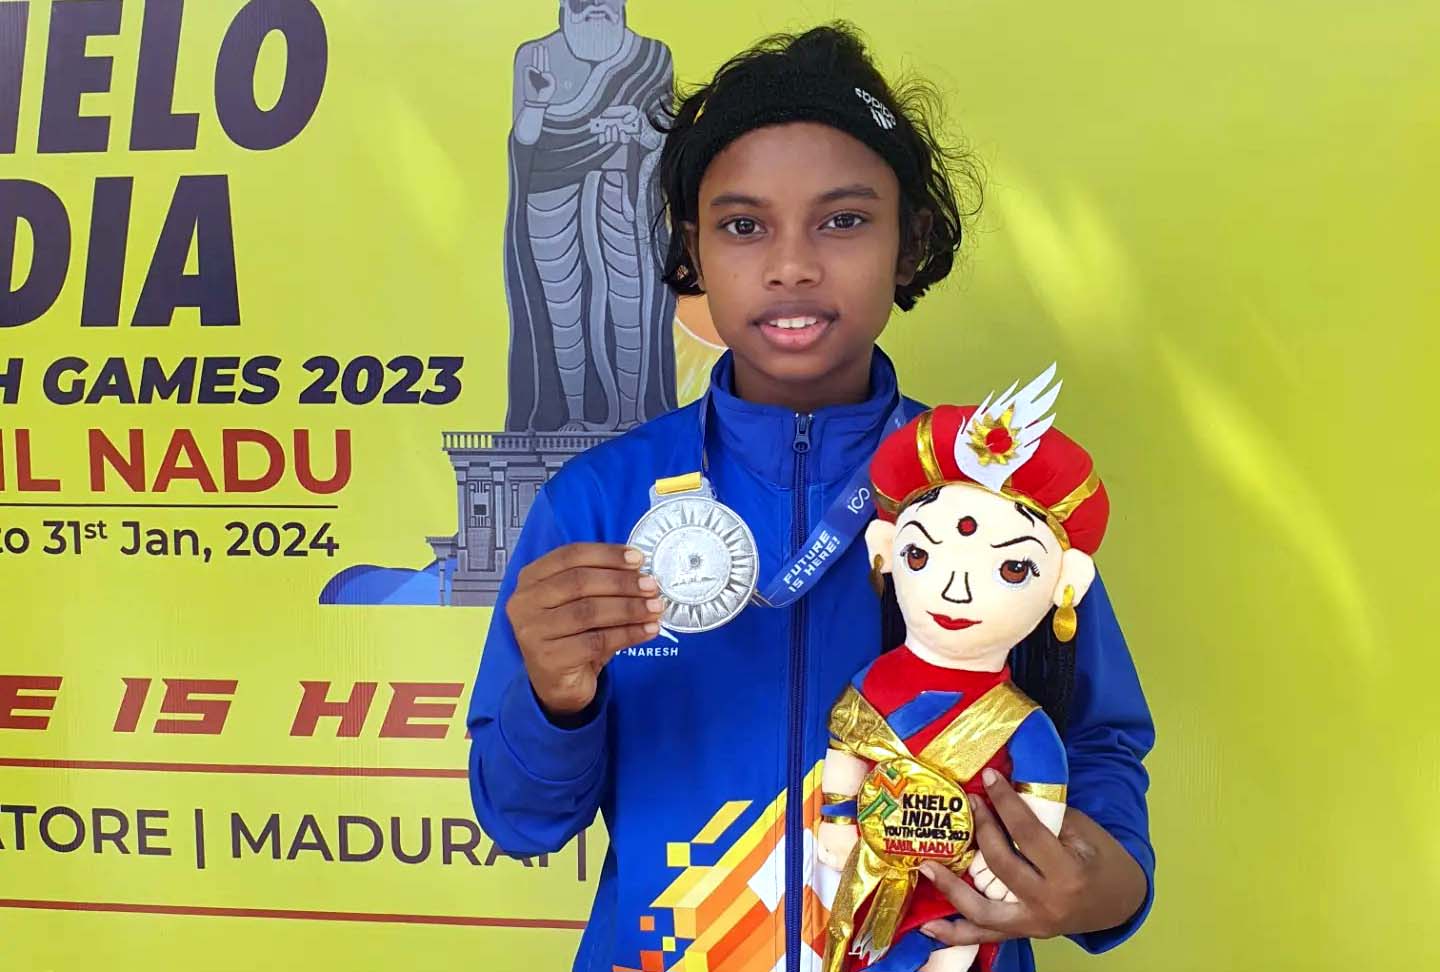 Odisha weightlifter Priteesmita Bhoi poses with her silver medal at the 6th Khelo India Youth Games in Chennai, Tamil Nadu on 26 January 2024.